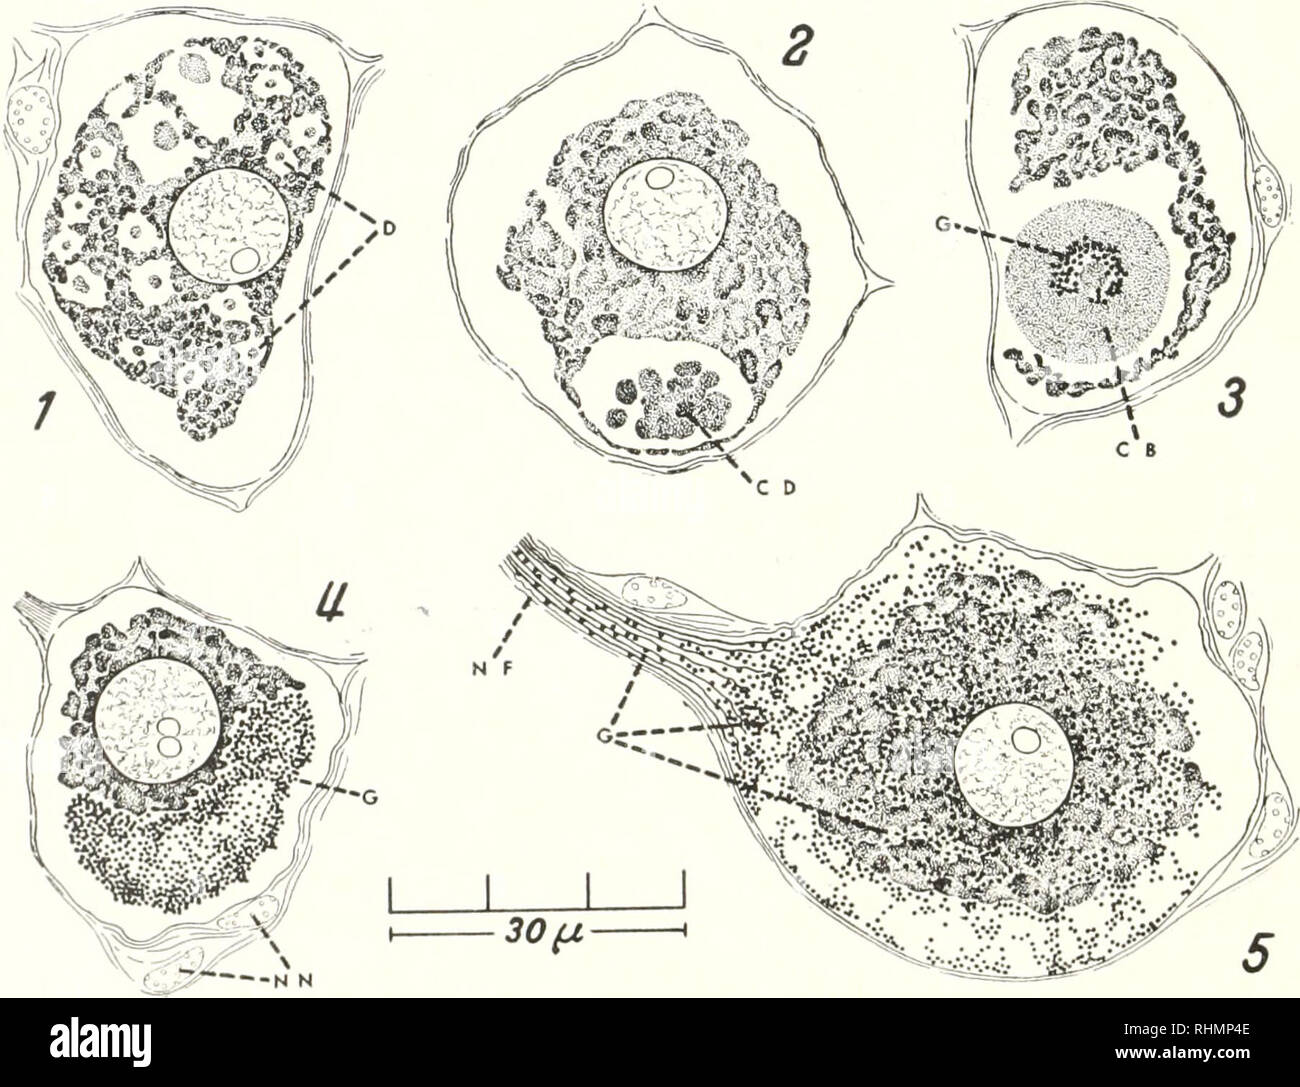 . The Biological bulletin. Biology; Zoology; Biology; Marine Biology. FIGURE 9. /3 neurosecretory cells from the brain and the commissural ganglion (cf. Fig. 1, B and C). Susa, Mallory. D, droplets appearing within cytoplasm; CD, droplets coalesced to form homogeneous mass; CB, central body formed. Scale is applicable to 1, 3, and 4. 2 is a further magnification of portion of cytoplasm in 1.. 1 i'.i'KK 10. (jiant ft neurosecretory cells from the medulla terminalis (cf. Fig. 1, A). Susa, Alallory. NF, nerve-fiber innervating the sinus gland; NN, nuclei of the neurilemma; G, M rretory granules ; Stock Photo